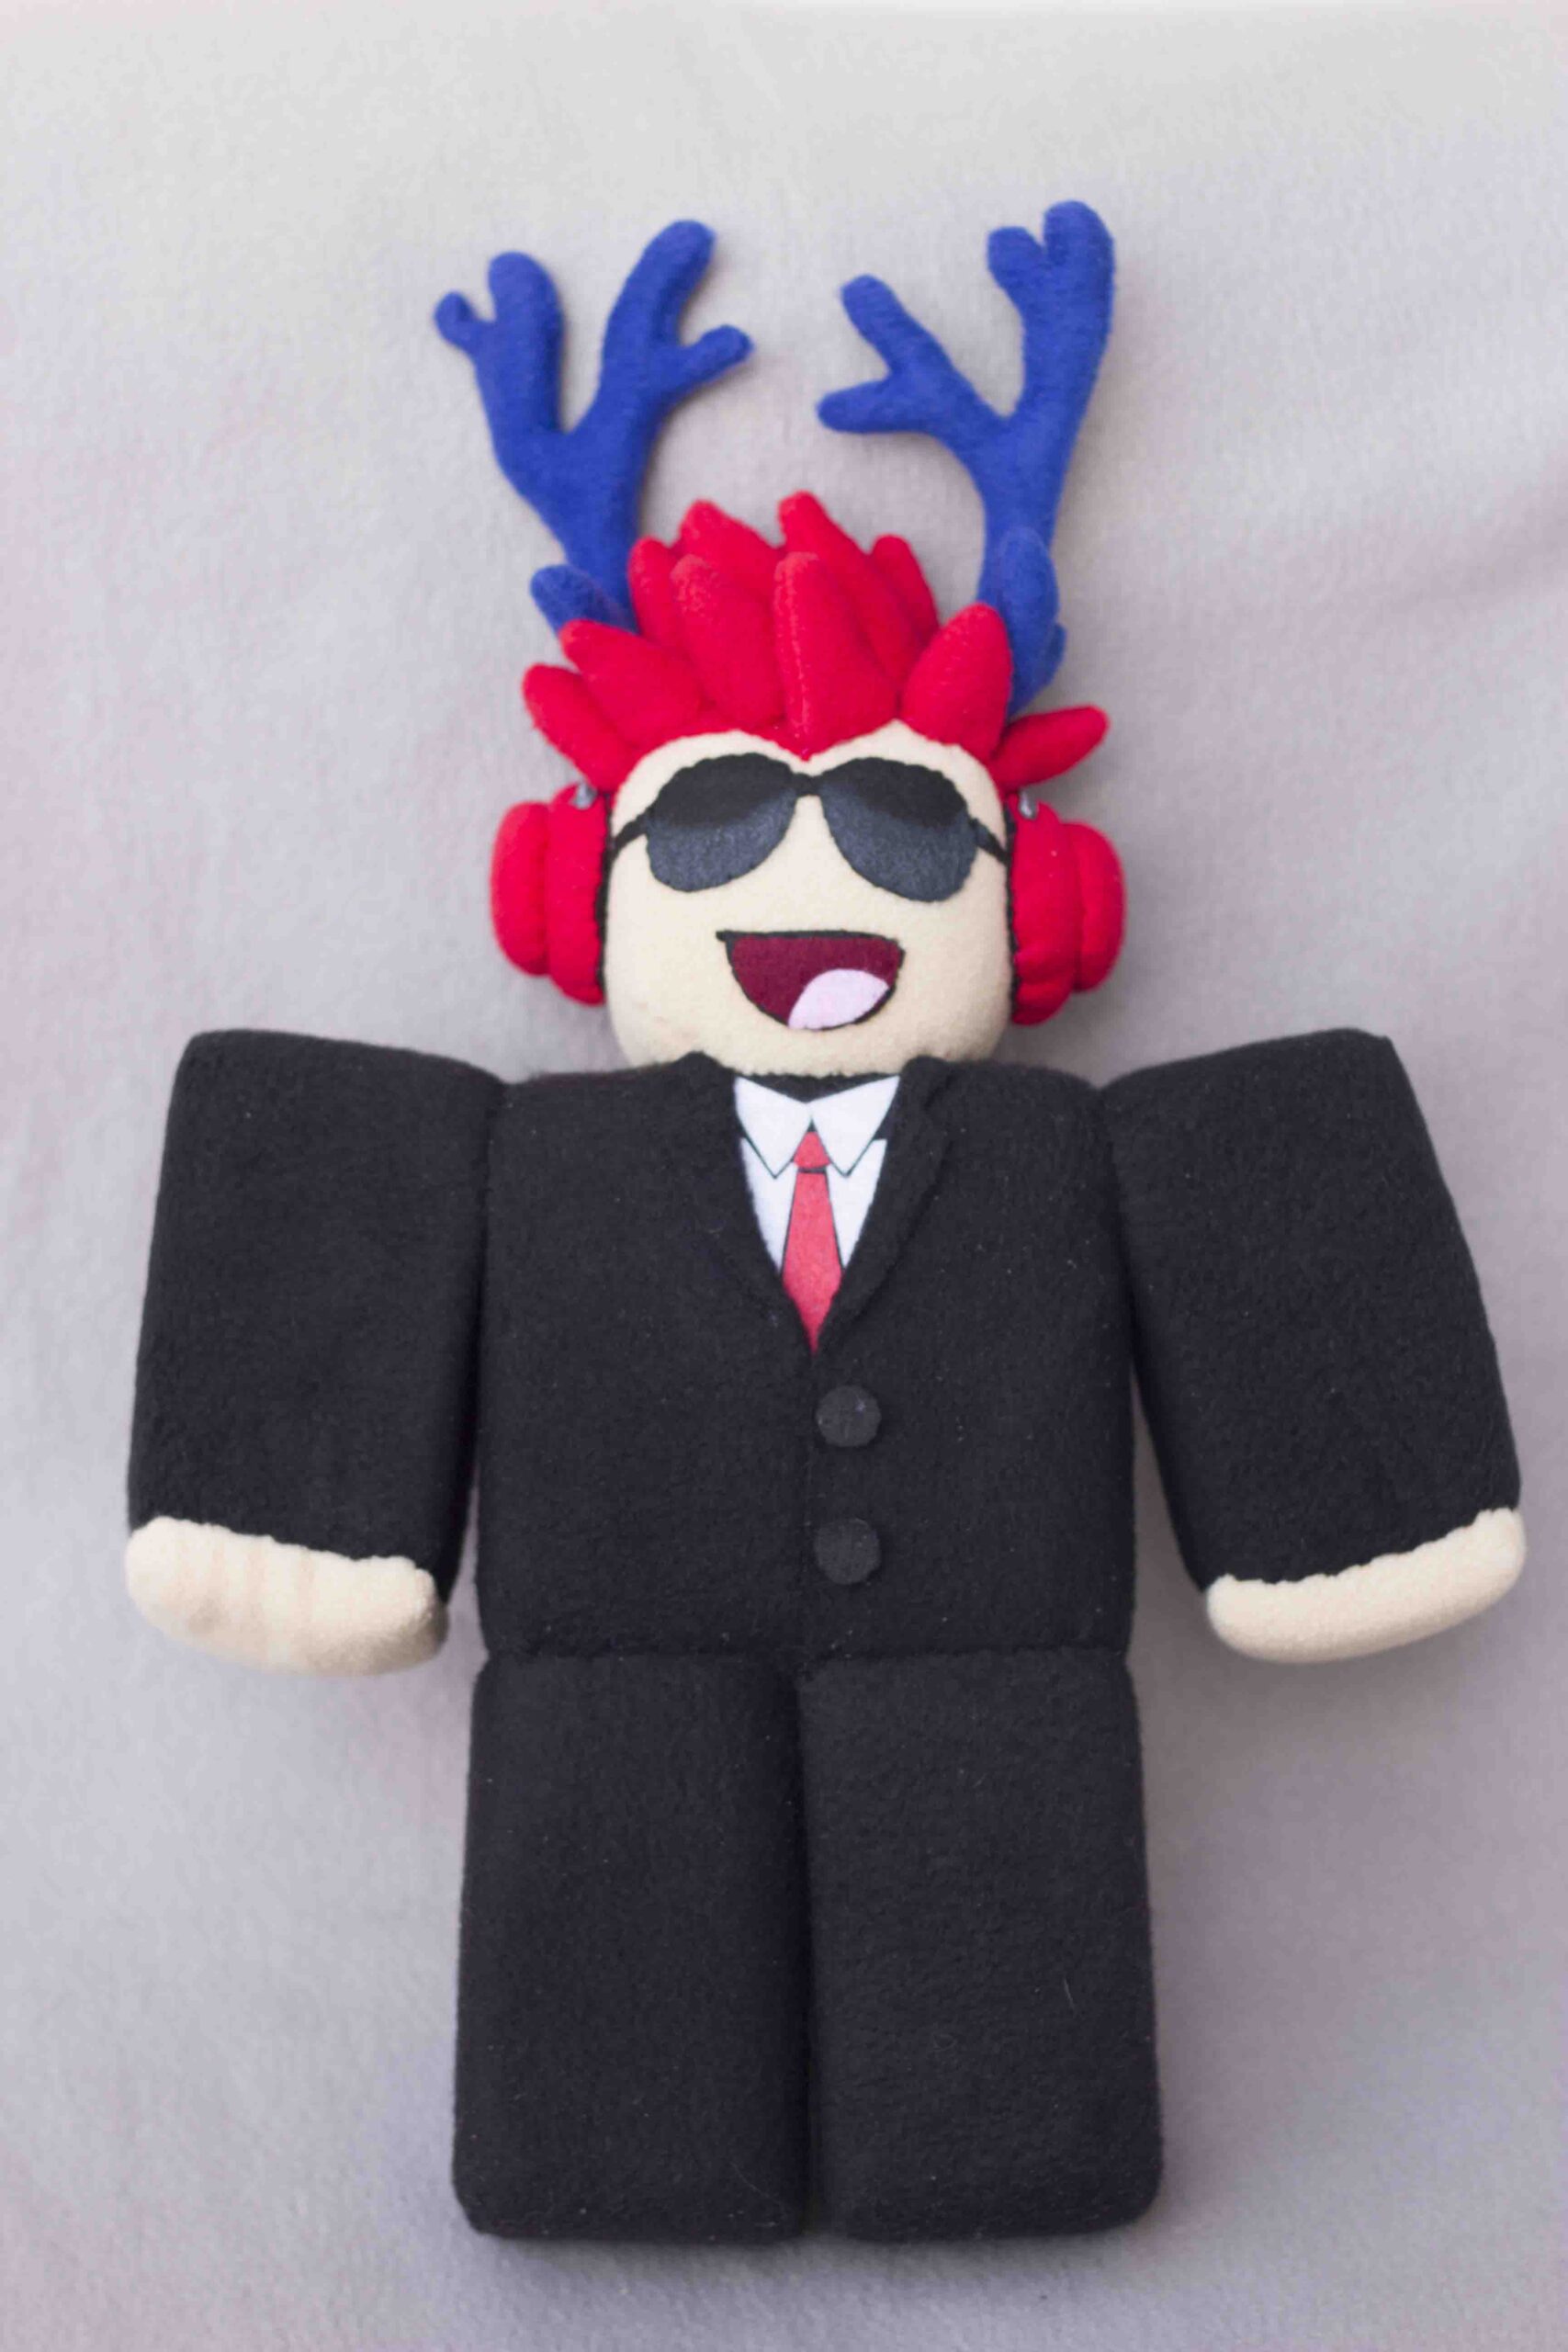 Everything You Need to Know About Crafting a Good Roblox Avatar